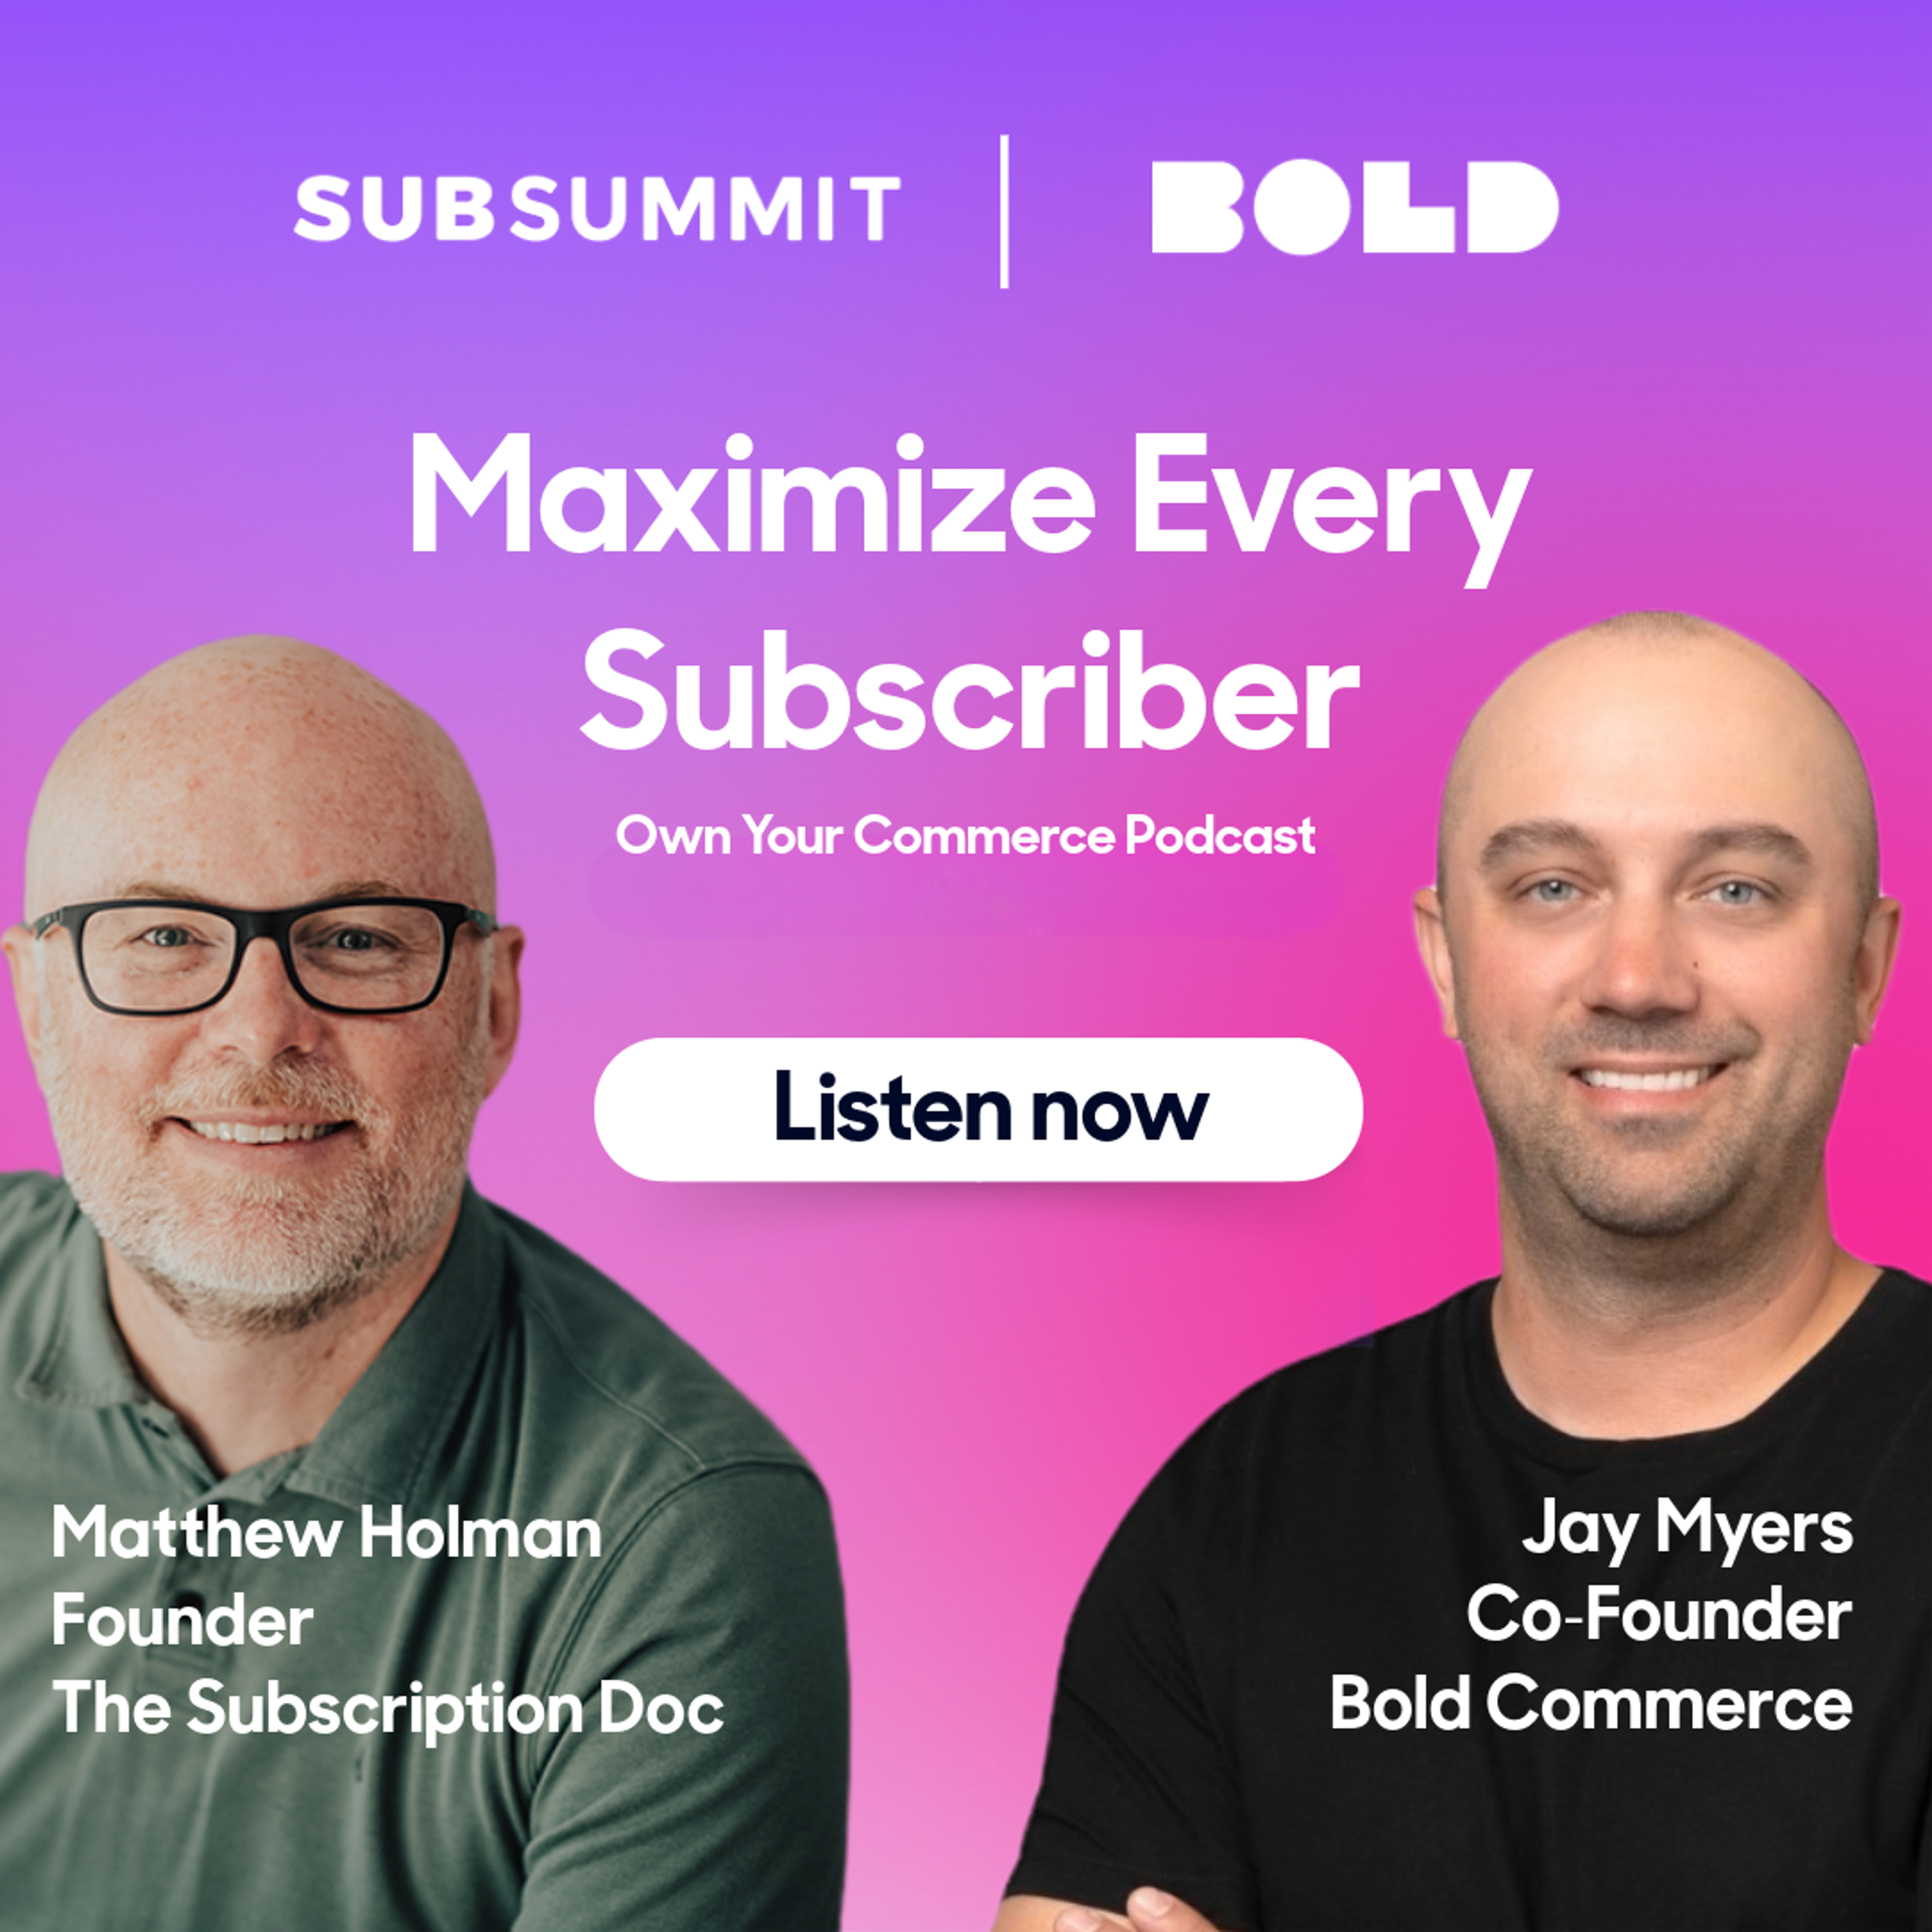 Own Your Commerce, recorded live from SubSummit in Dallas with host Jay and Matthew Holman from Subscription Prescription 